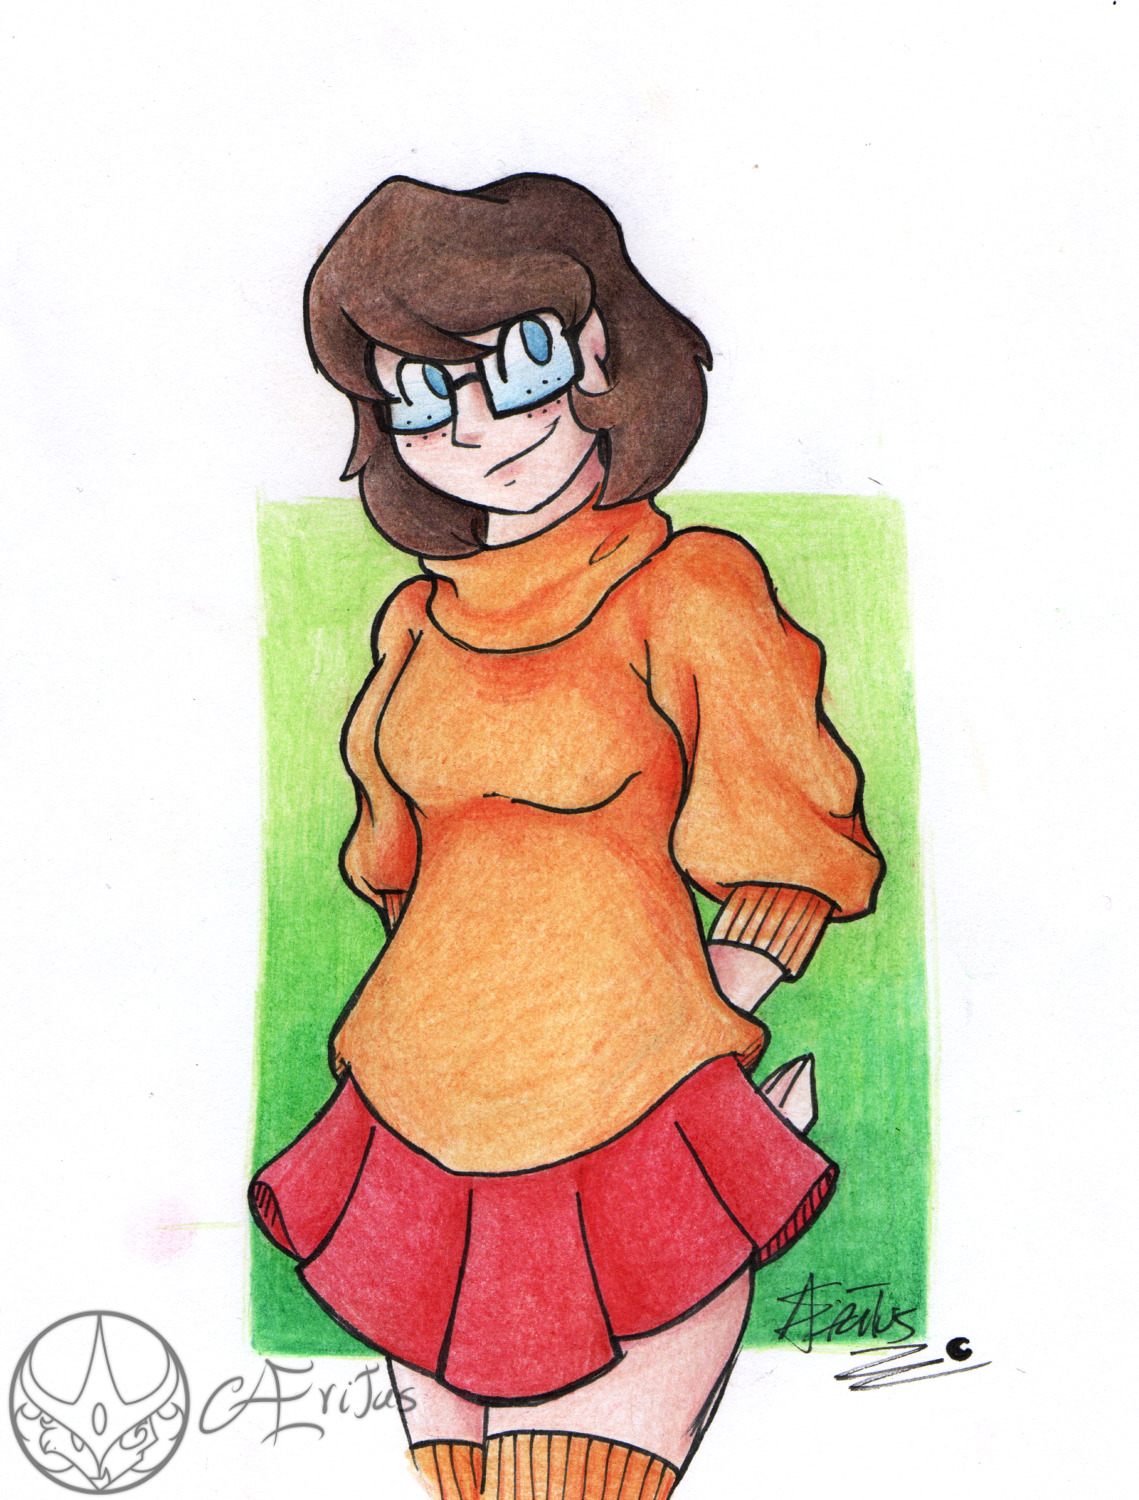 Traditional request for @mr-anonypony “How about a bit thicker Velma of the Scooby